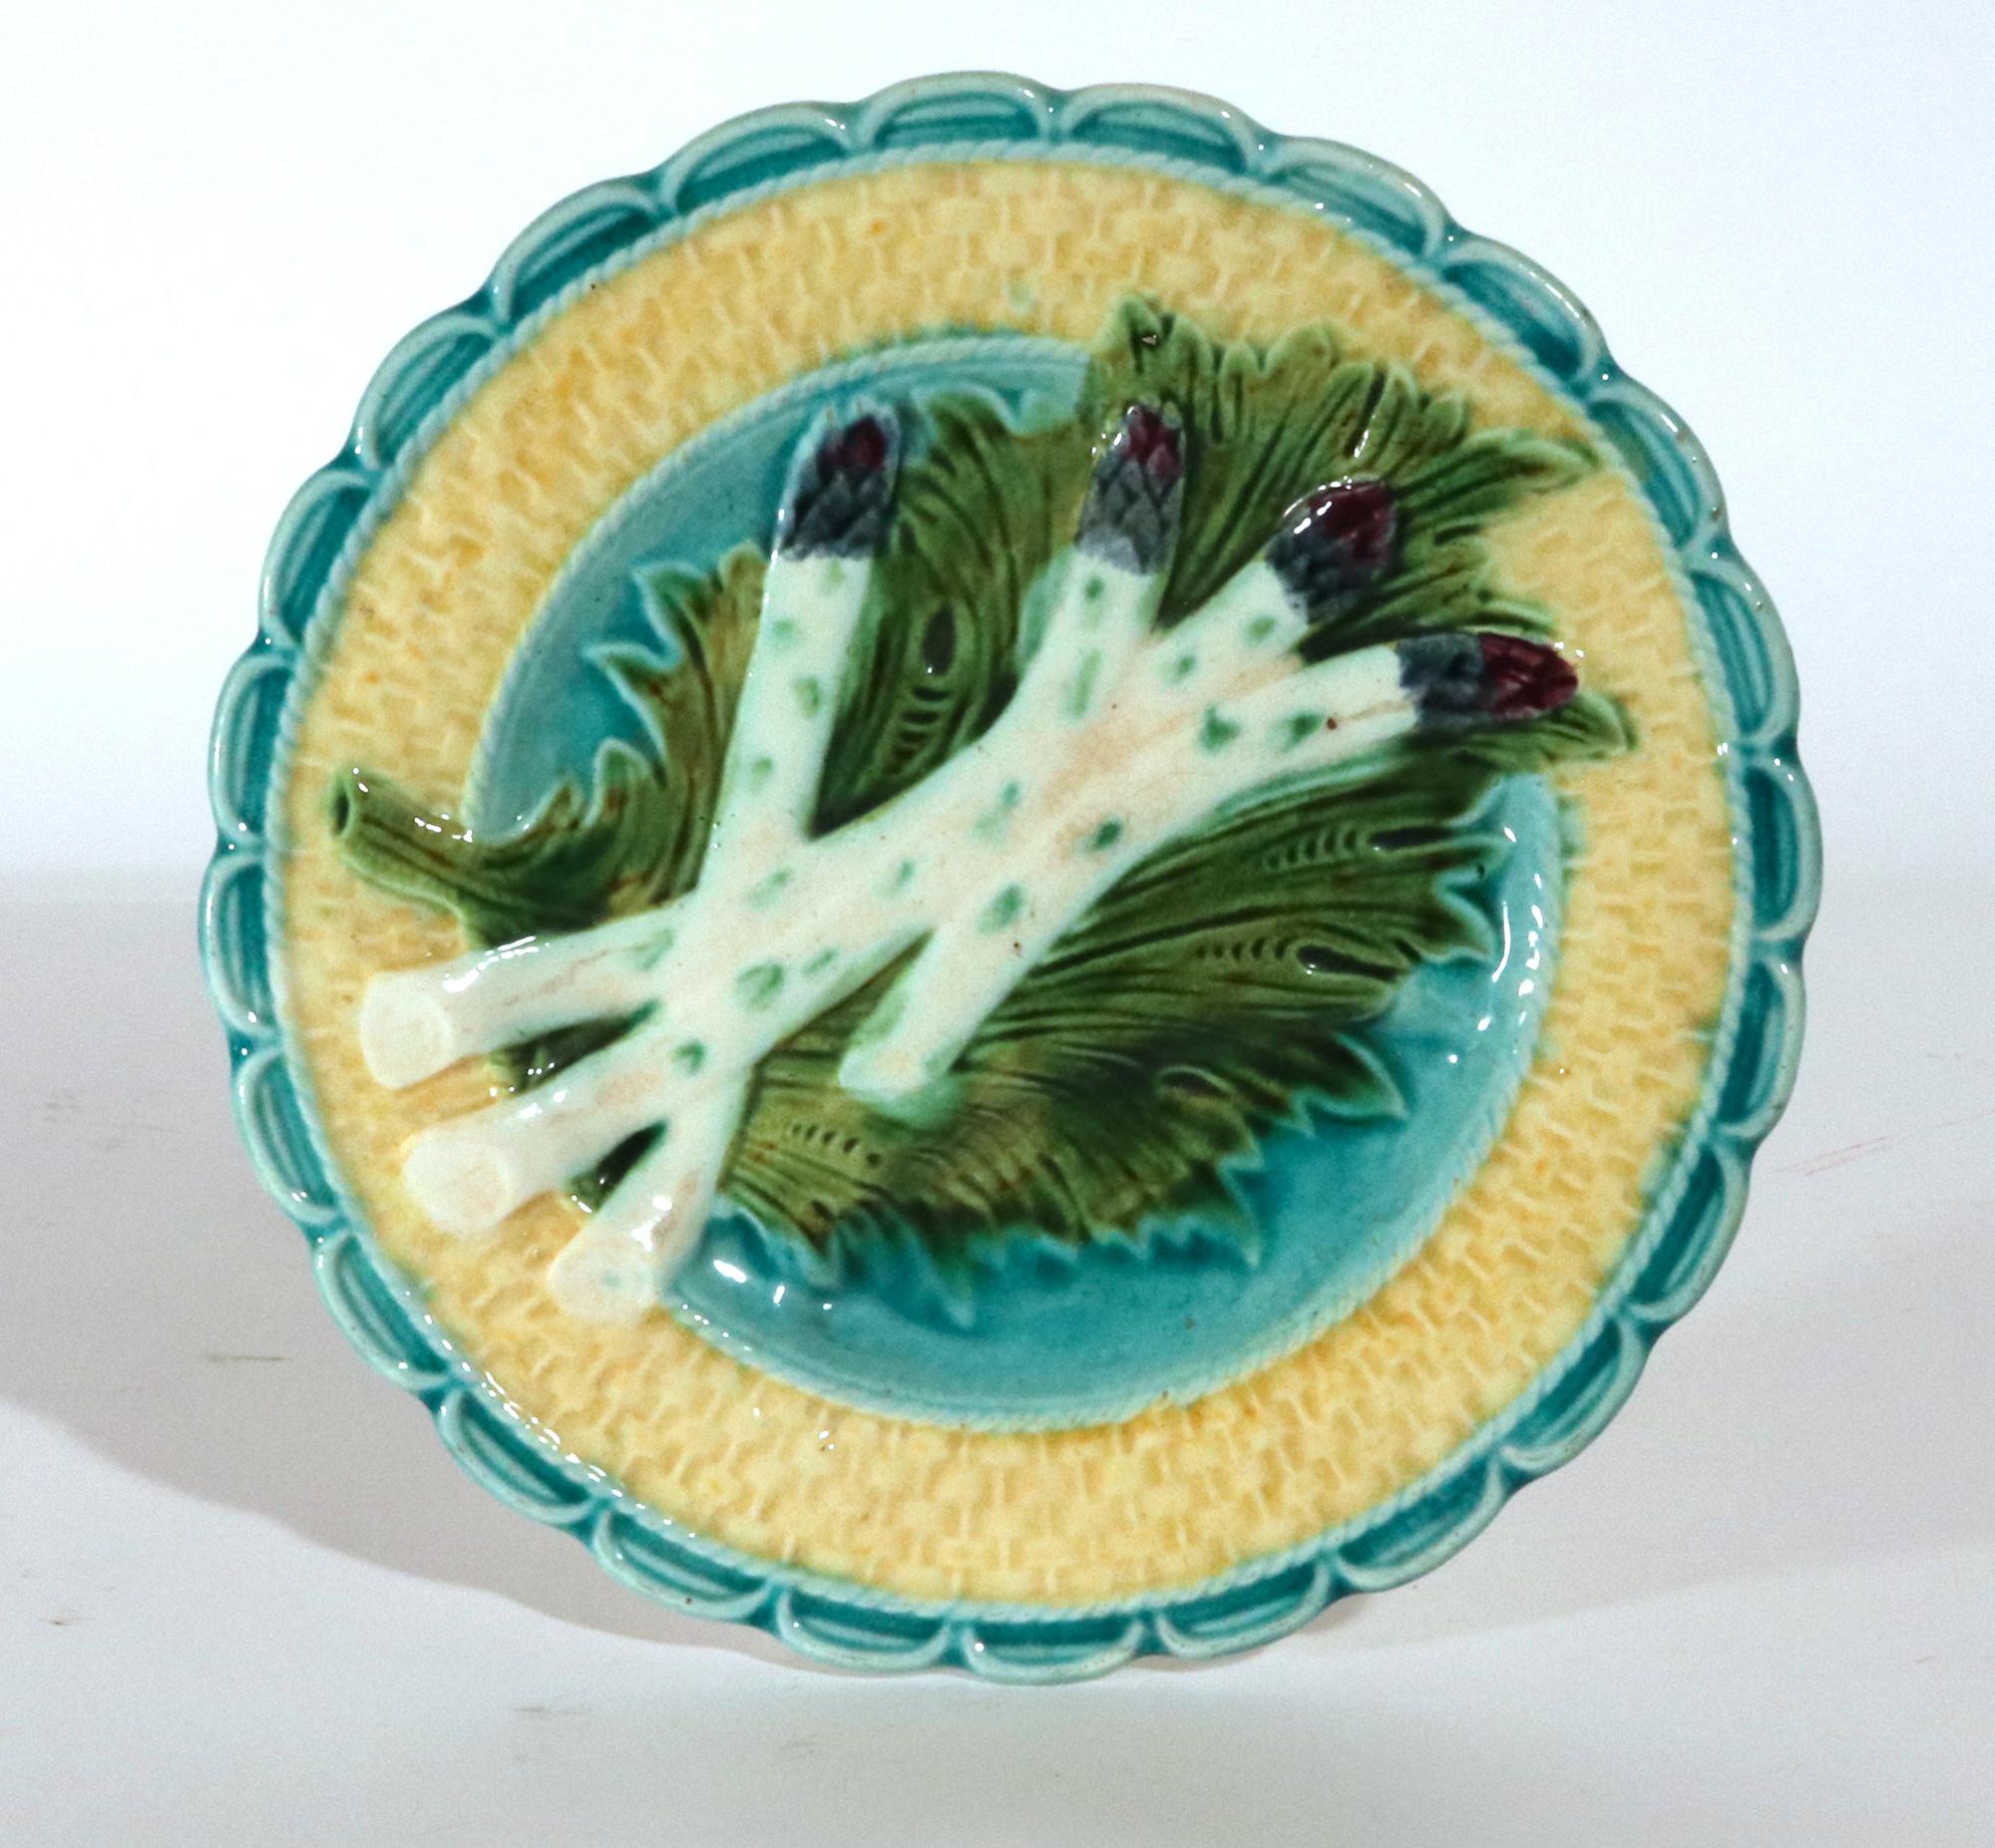 French Majolica Asparagus Dishes, 
Salins Factory,  
Set of Six,
Circa 1880-90

The French majolica molded plates decorated with four asparagus placed on a large green leaf with a yellow basket-weave border and an aqua blue shaped rim.

Dimensions: